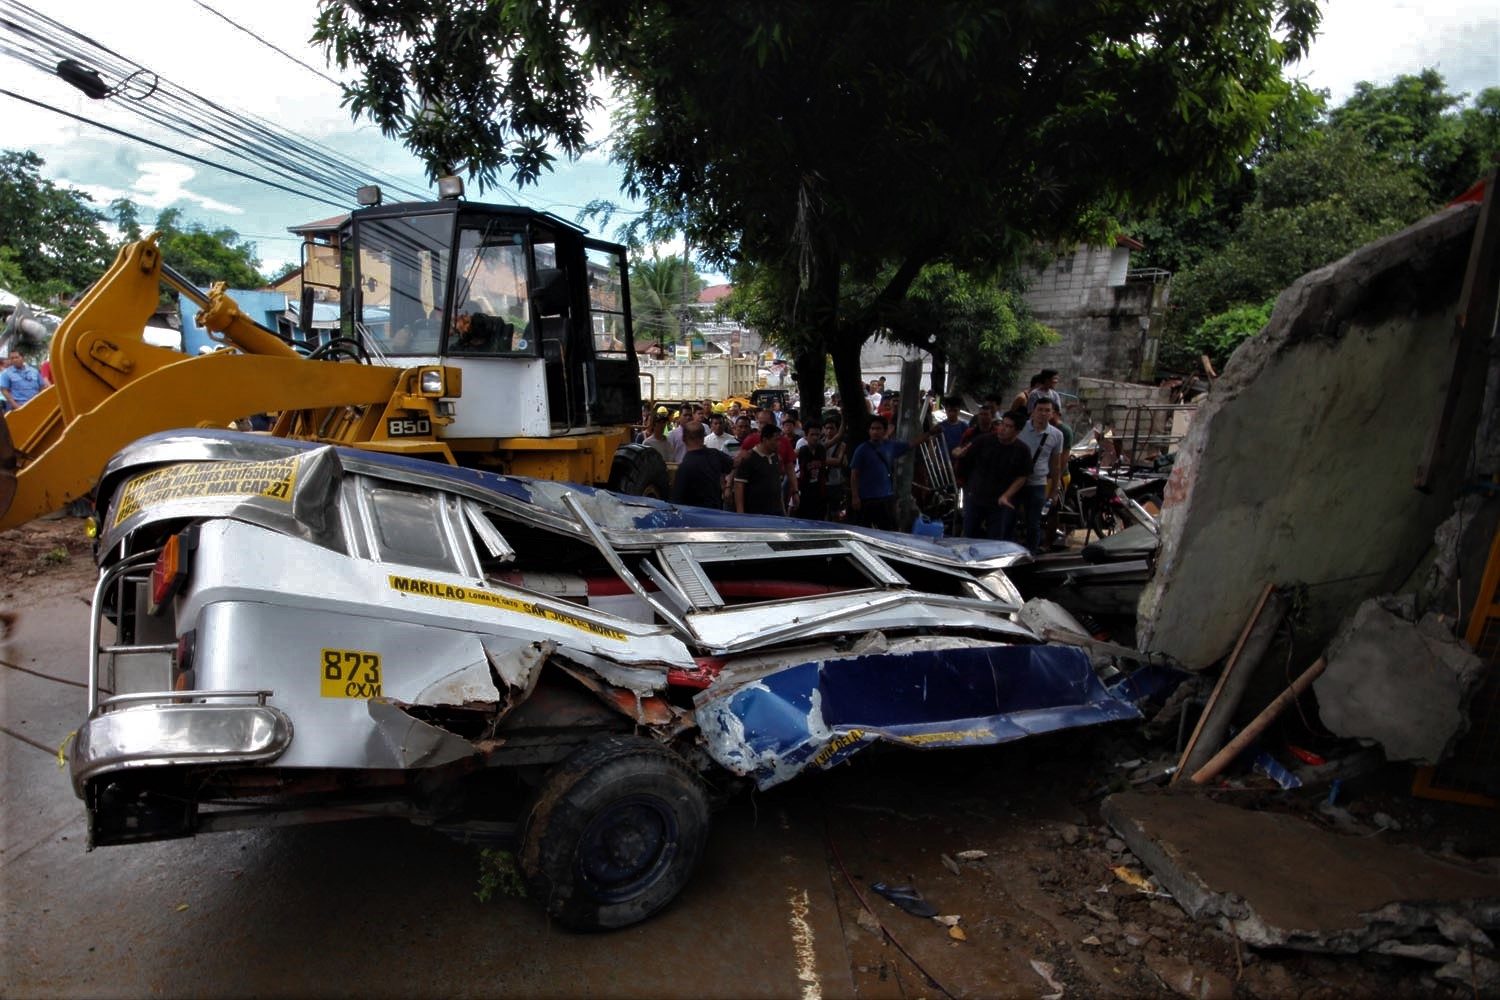 FLATTENED. A jeepney is flattened following the collapse and explosion of a water tank. Photo by DARREN LANGIT 